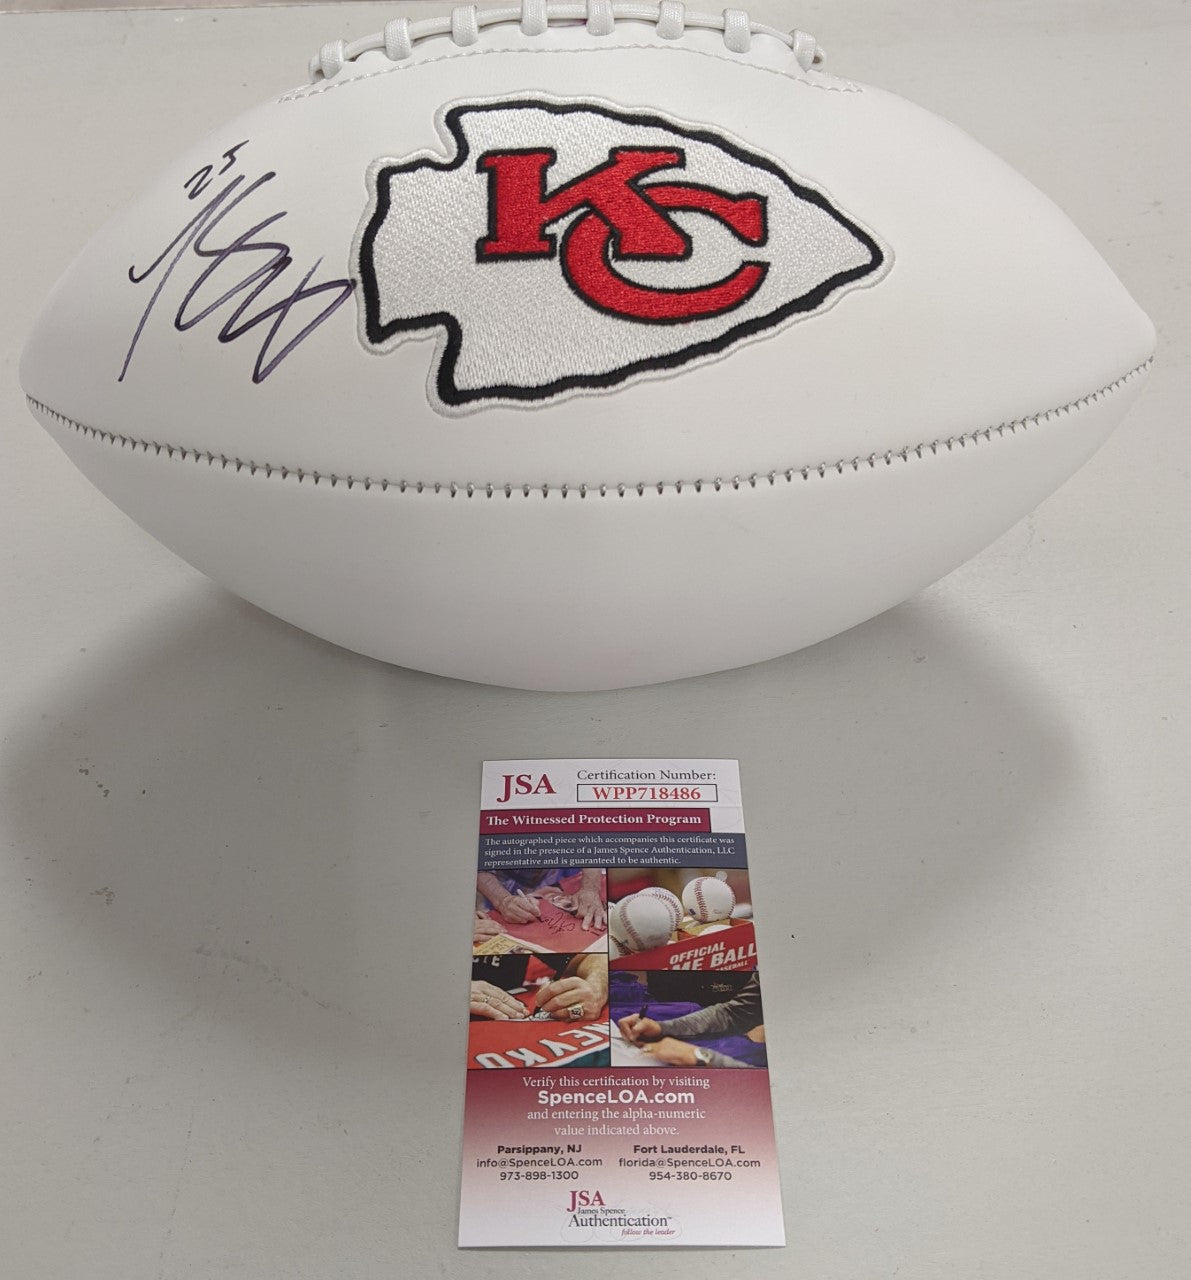 chiefs autographed football